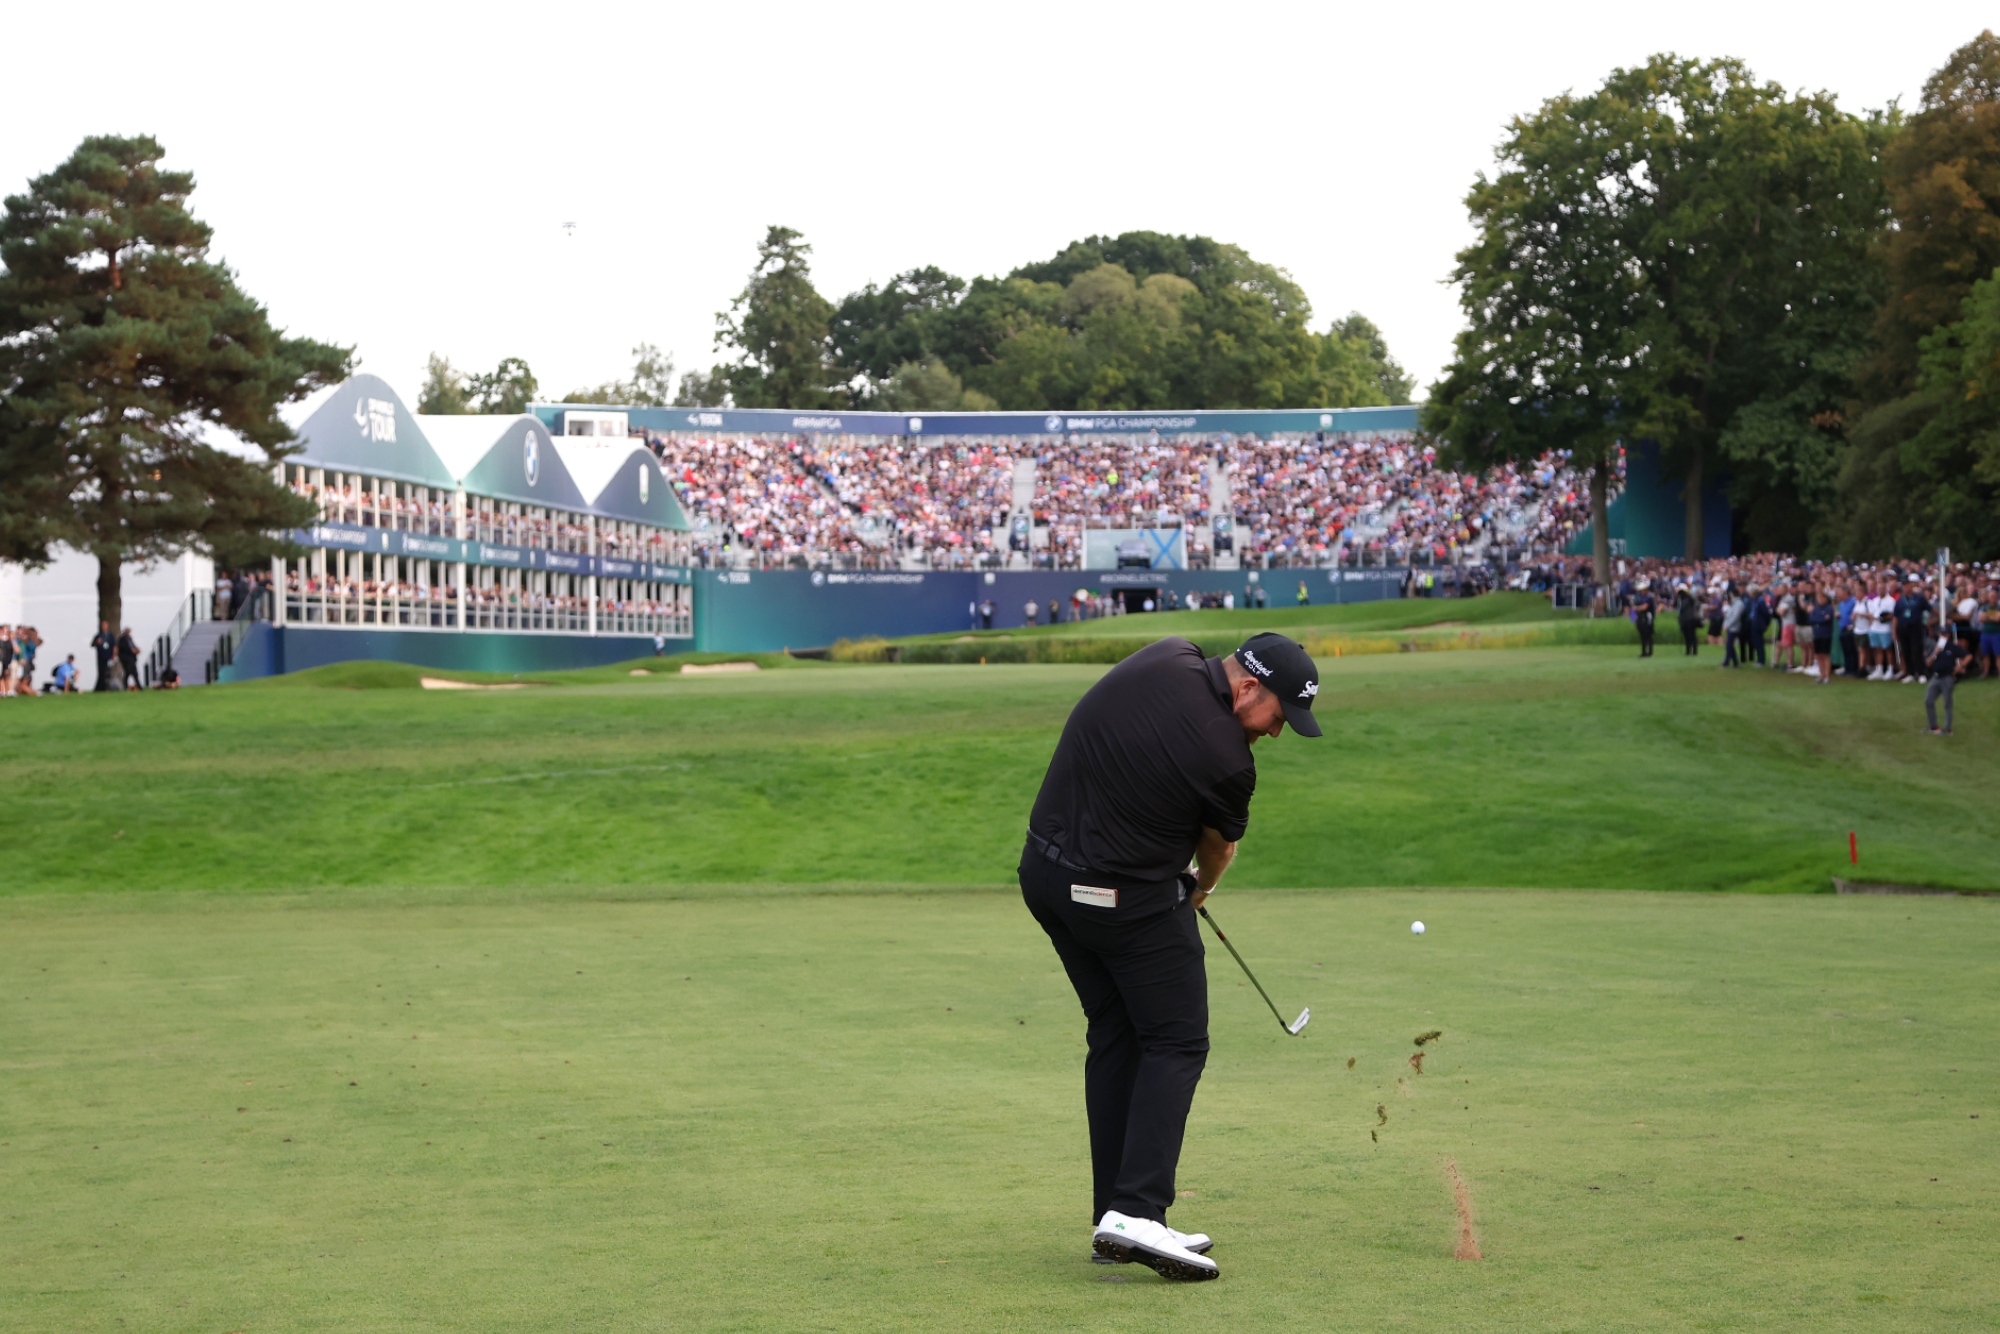 The Slam: Recapping an extraordinary BMW PGA Championship + All the LIV Golf beef